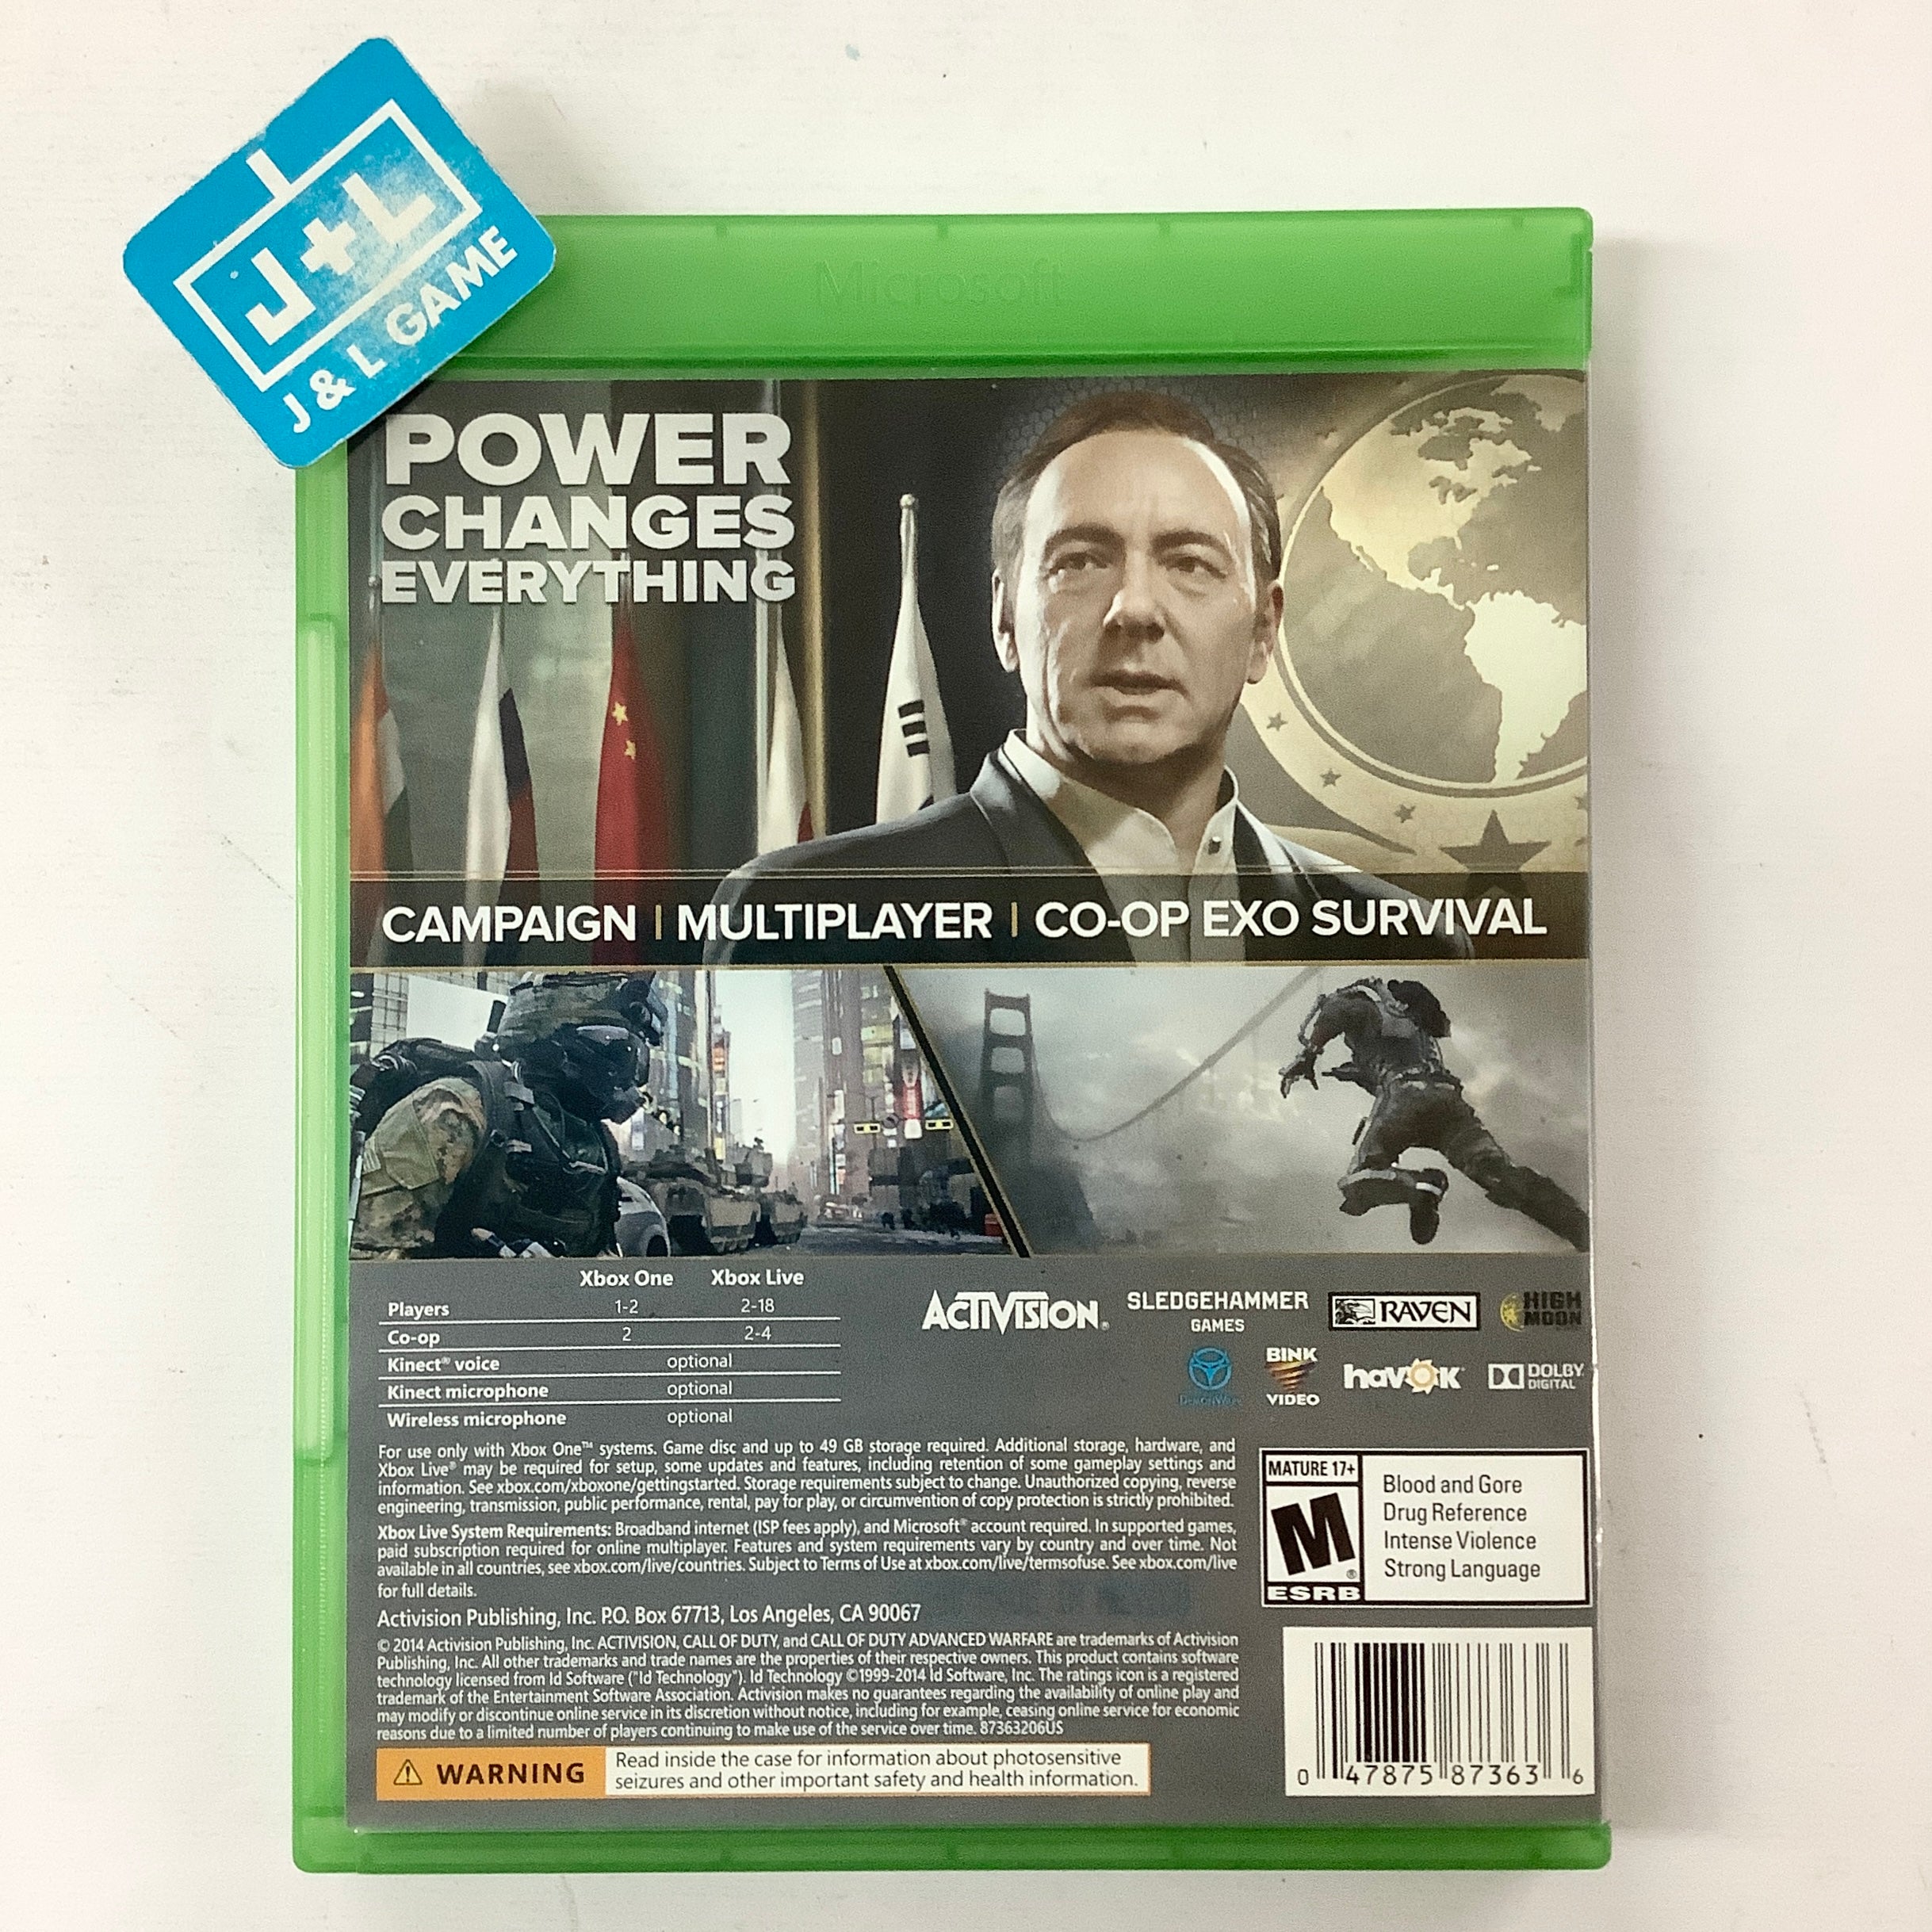 Call of Duty: Advanced Warfare - (XB1) Xbox One [Pre-Owned] Video Games ACTIVISION   